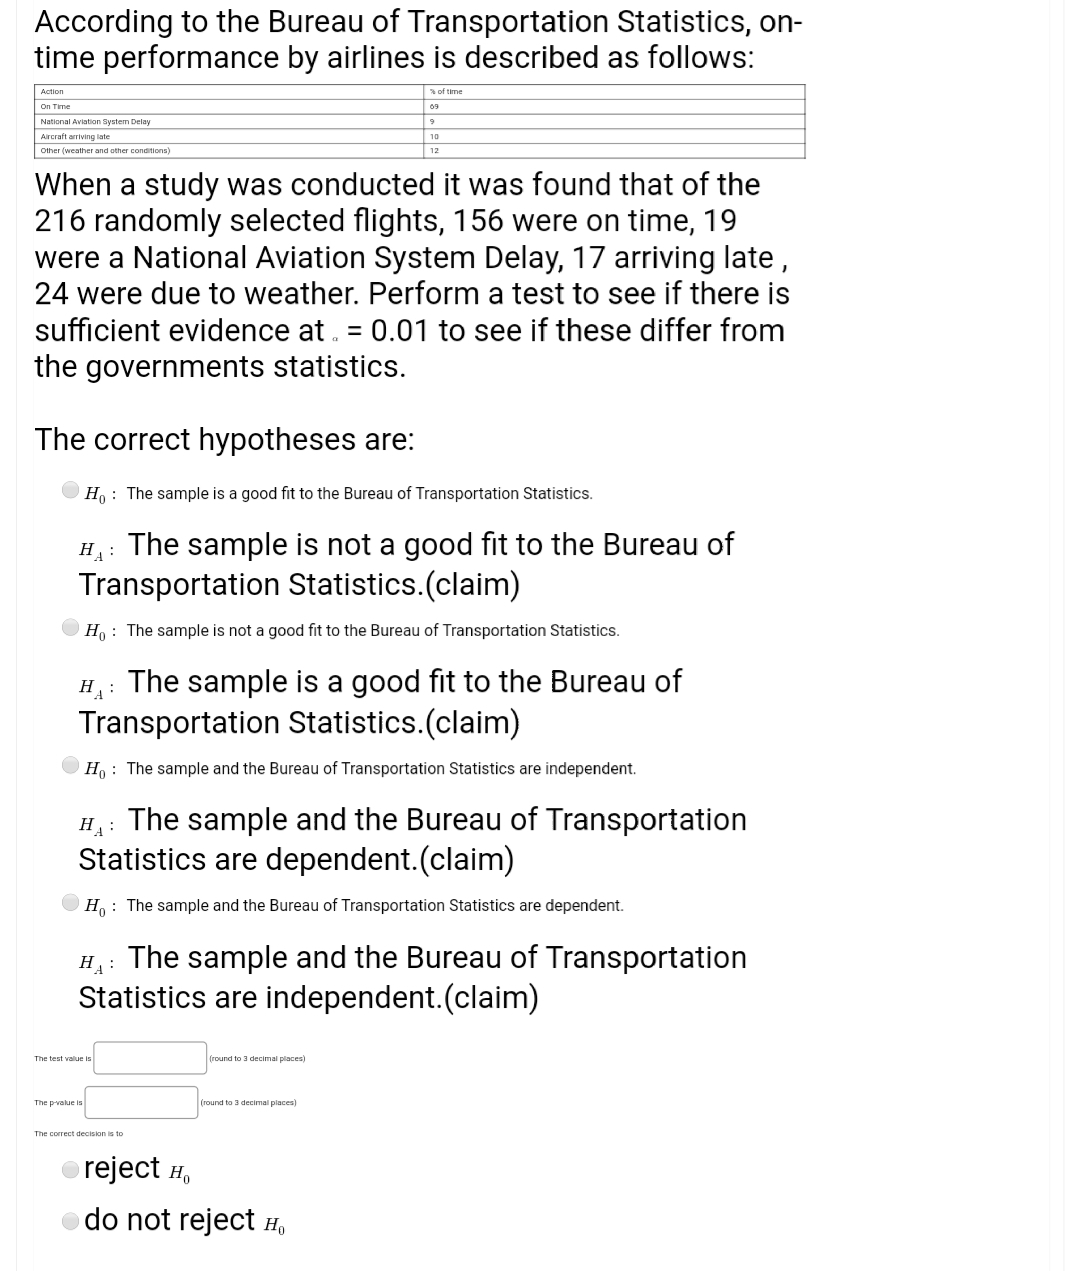 The correct hypotheses are:
H : The sample is a good fit to the Bureau of Transportation Statistics.
The sample is not a good fit to the Bureau of
Transportation Statistics.(claim)
H:
H, : The sample is not a good fit to the Bureau of Transportation Statistics.
H: The sample is a good fit to the Bureau of
Transportation Statistics.(claim)
O Ho : The sample and the Bureau of Transportation Statistics are independent.
The sample and the Bureau of Transportation
HA:
Statistics are dependent.(claim)
H: The sample and the Bureau of Transportation Statistics are dependent.
The sample and the Bureau of Transportation
Statistics are independent.(claim)
H:
The test valun is
(round to 3 decimal places)
The pvalue is
(round to 3 decimal places)
The correct decision is to
o reject H,
do not reject H,
